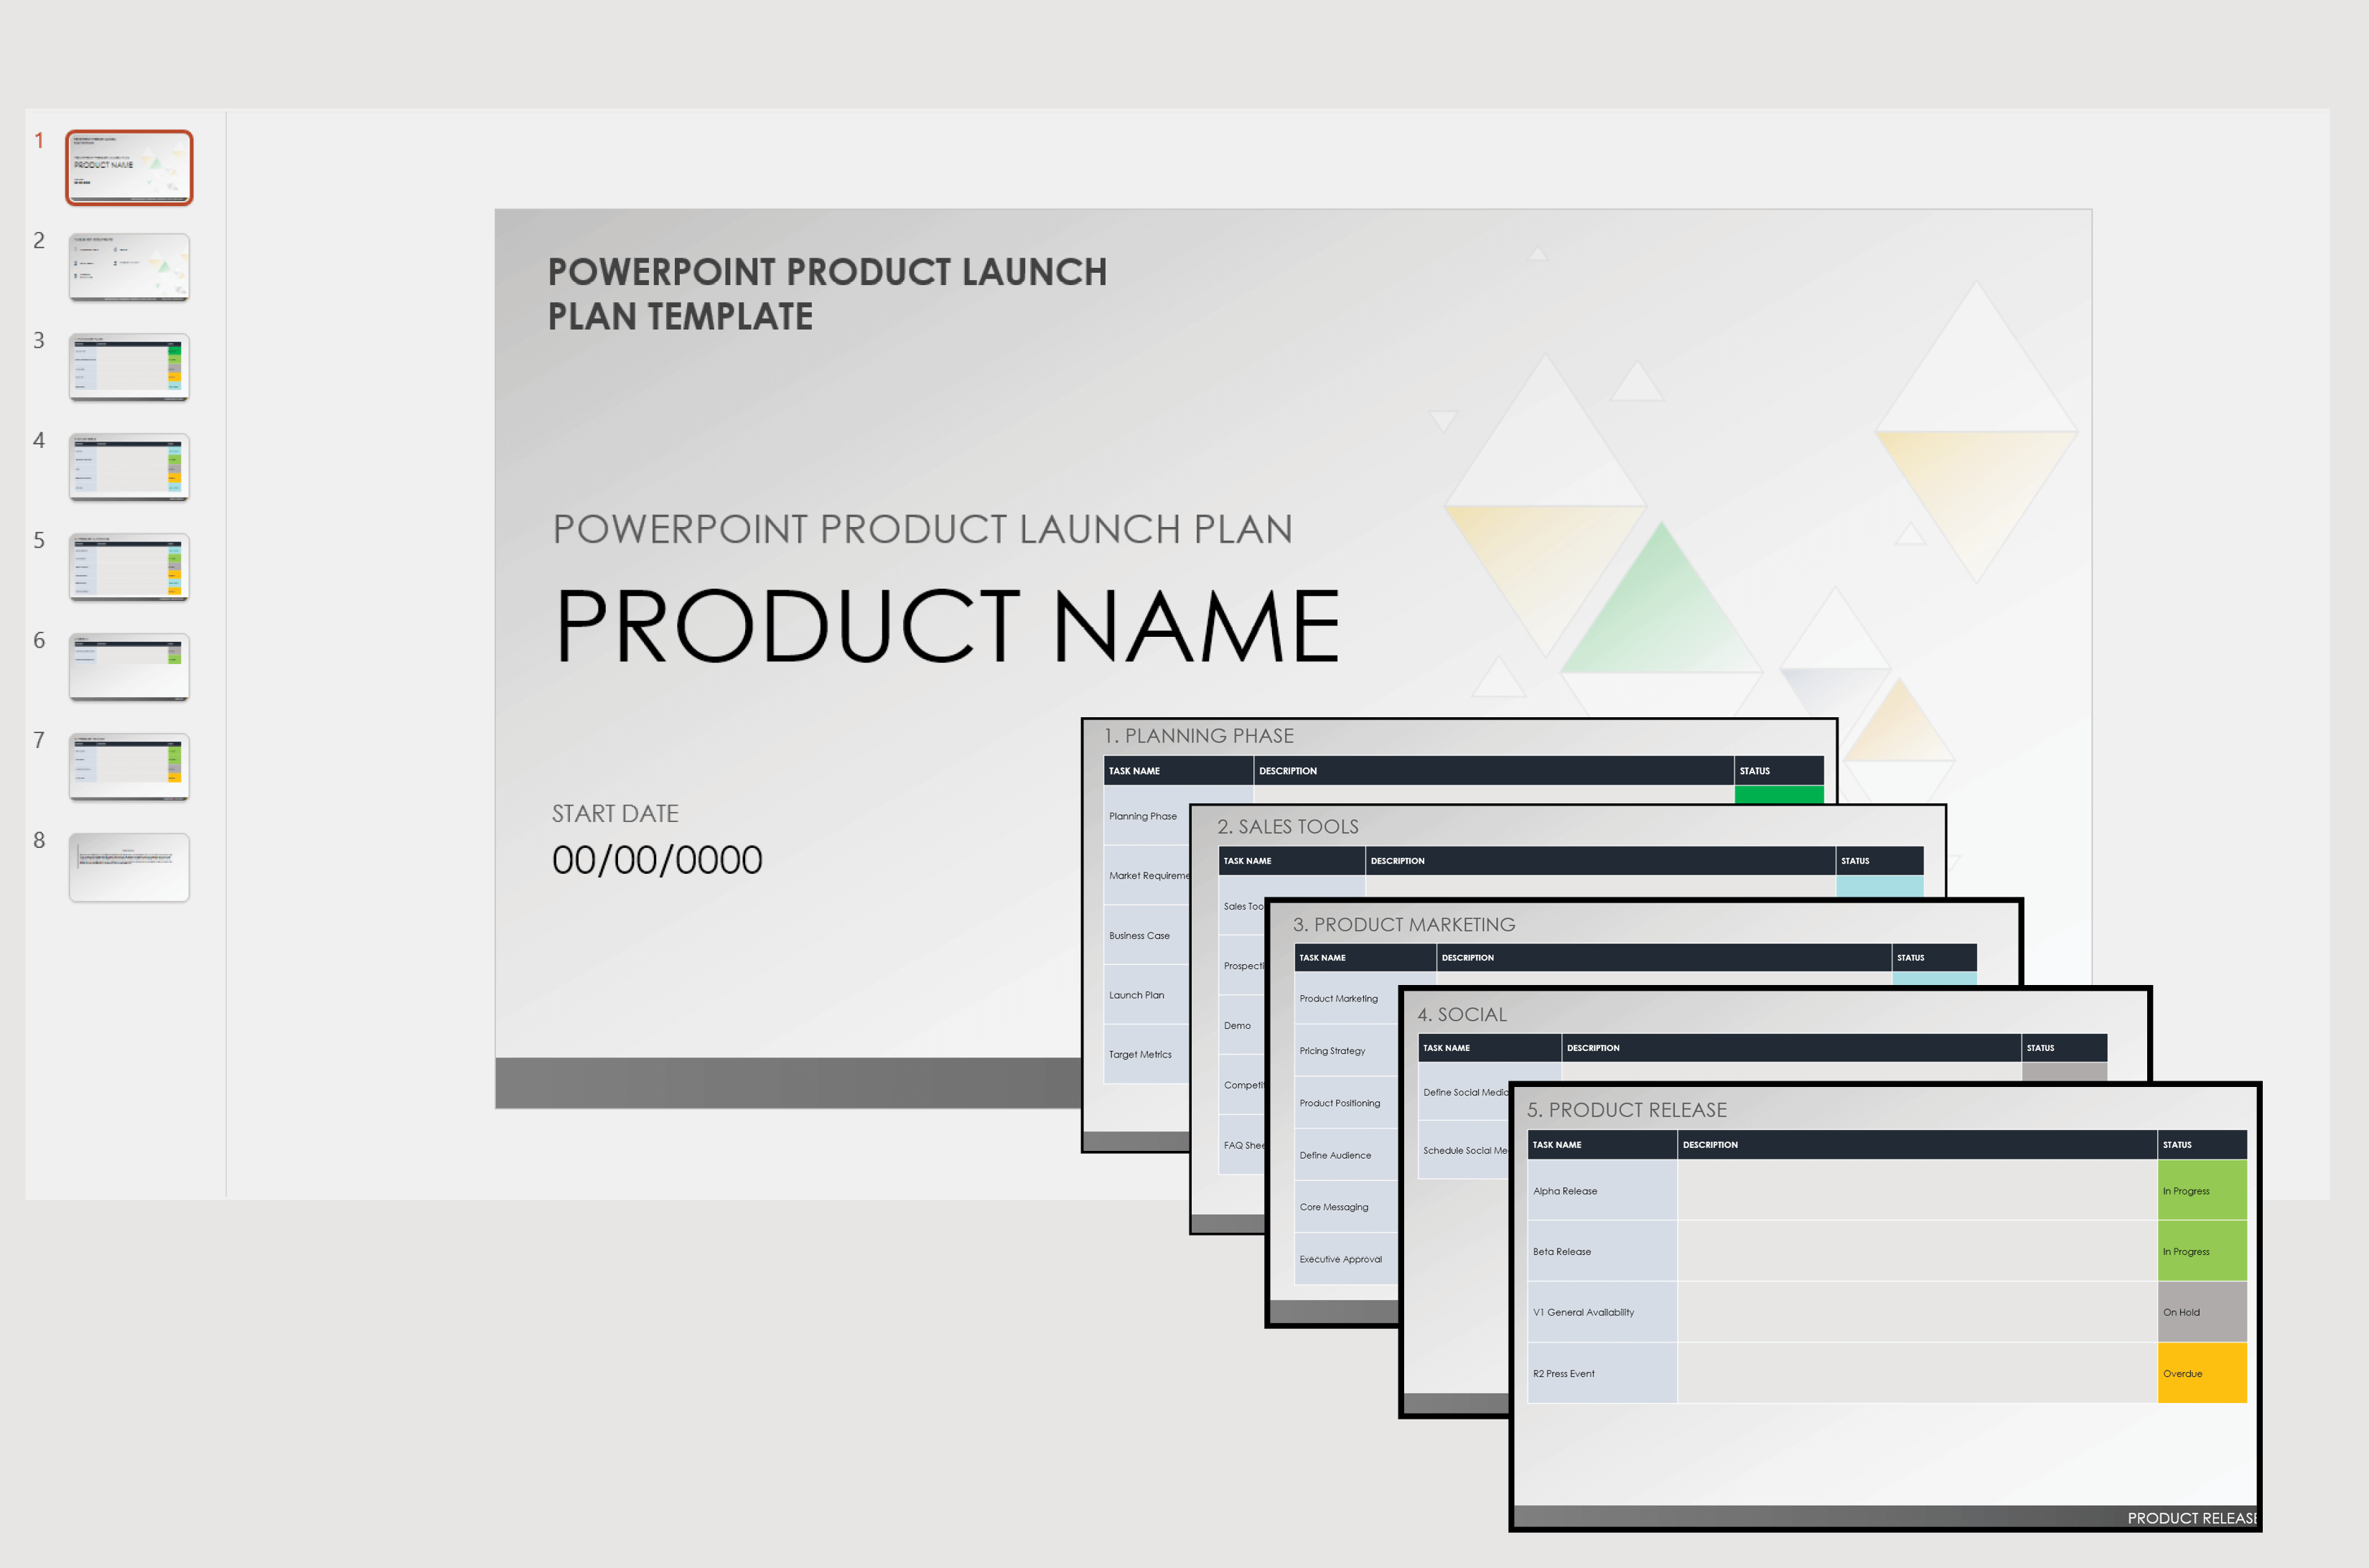 Powerpoint Product Launch Plan Template